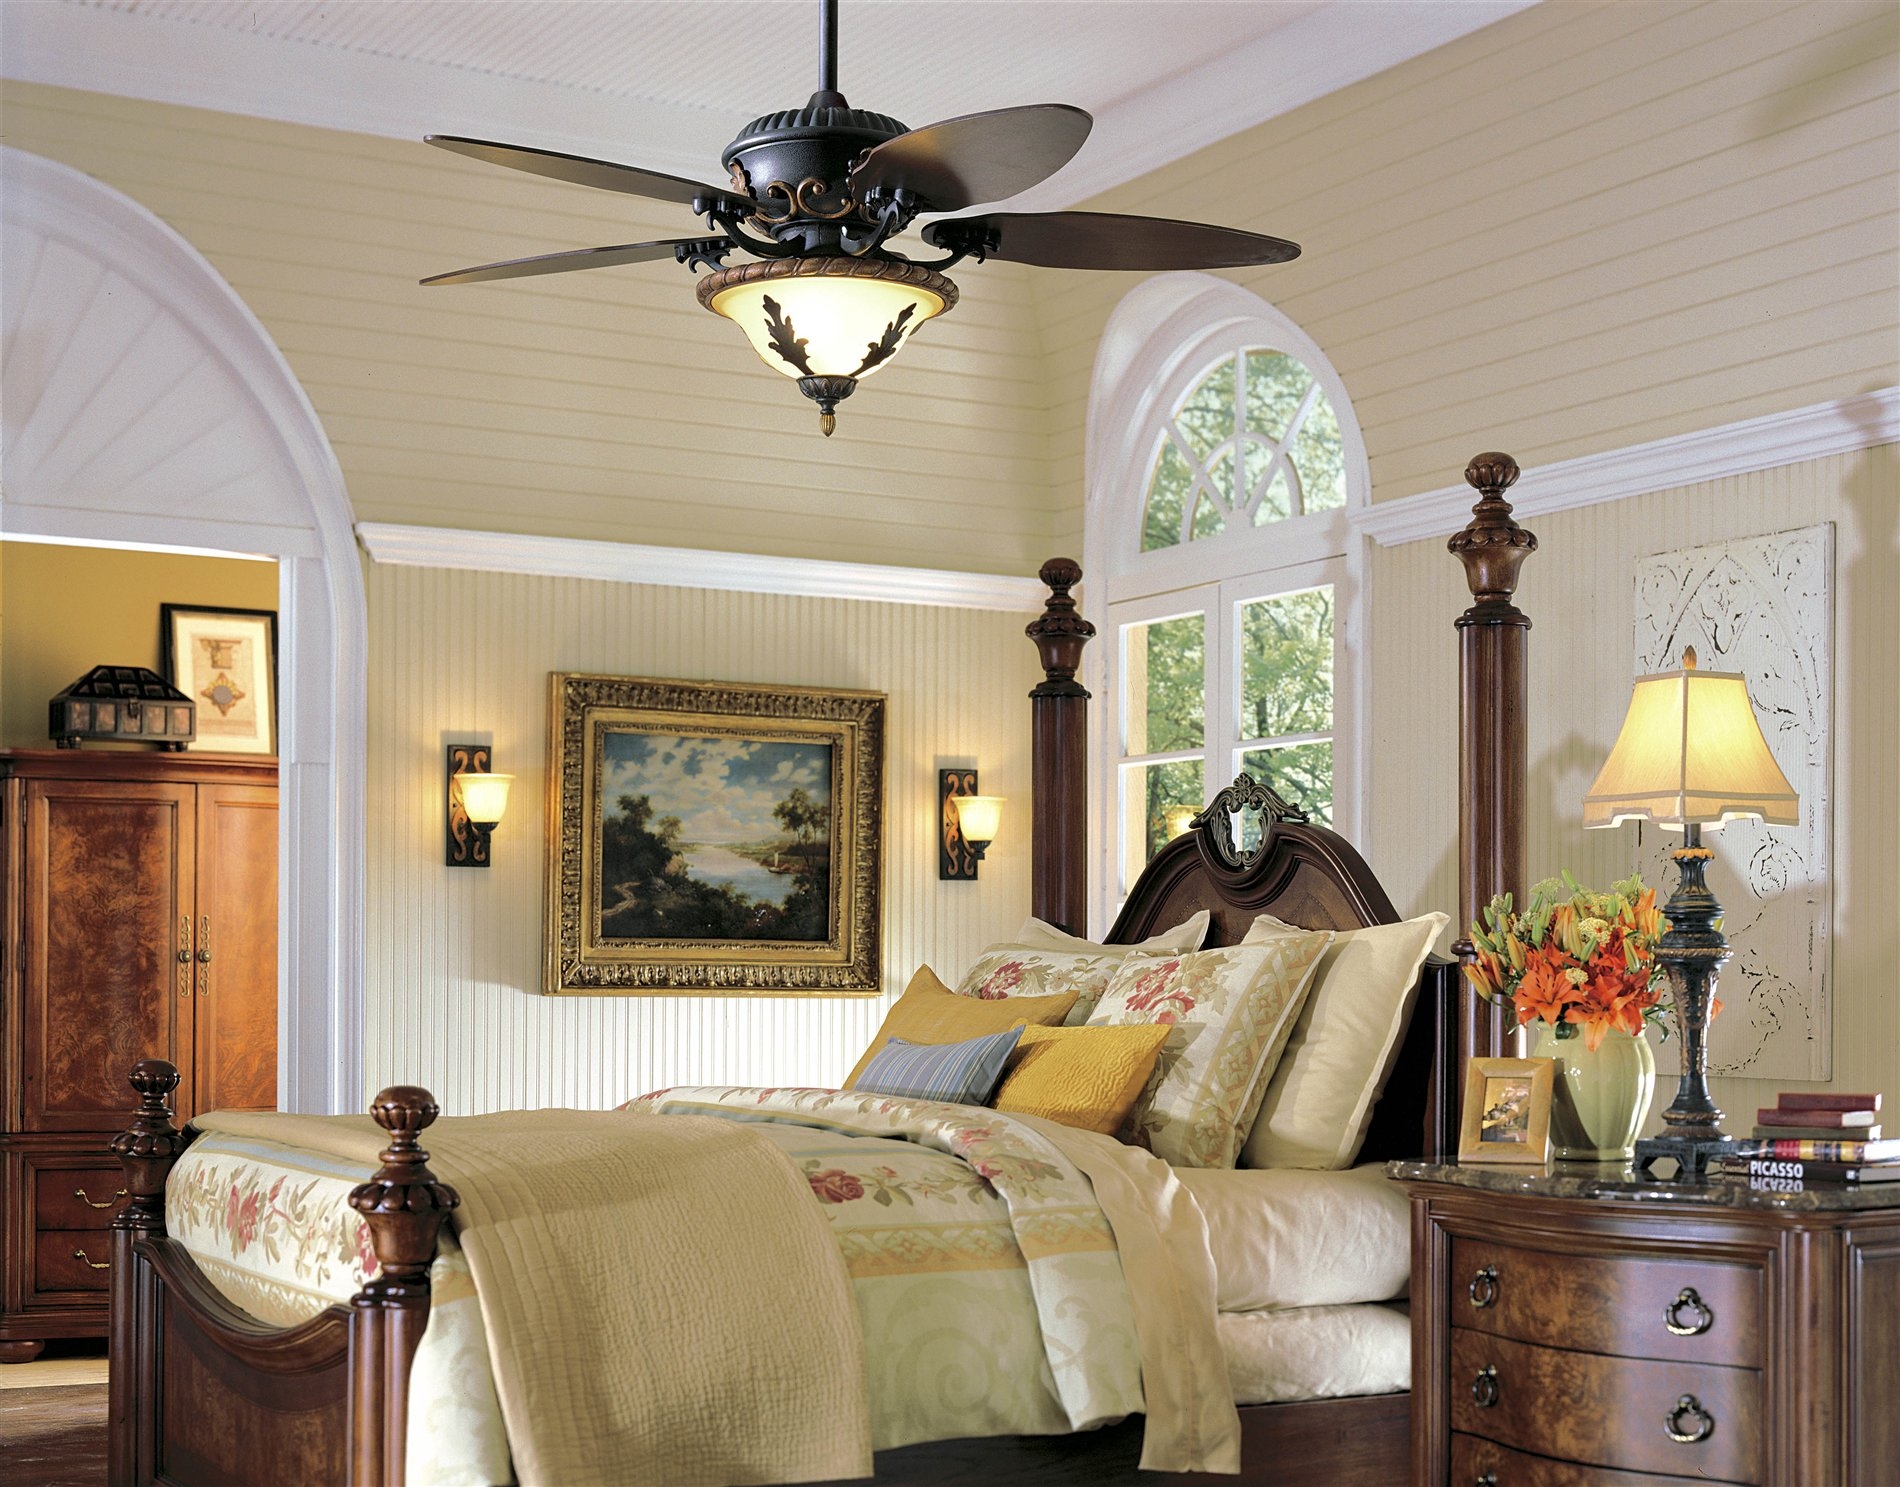 Best Ceiling Fan With Light For Bedroom